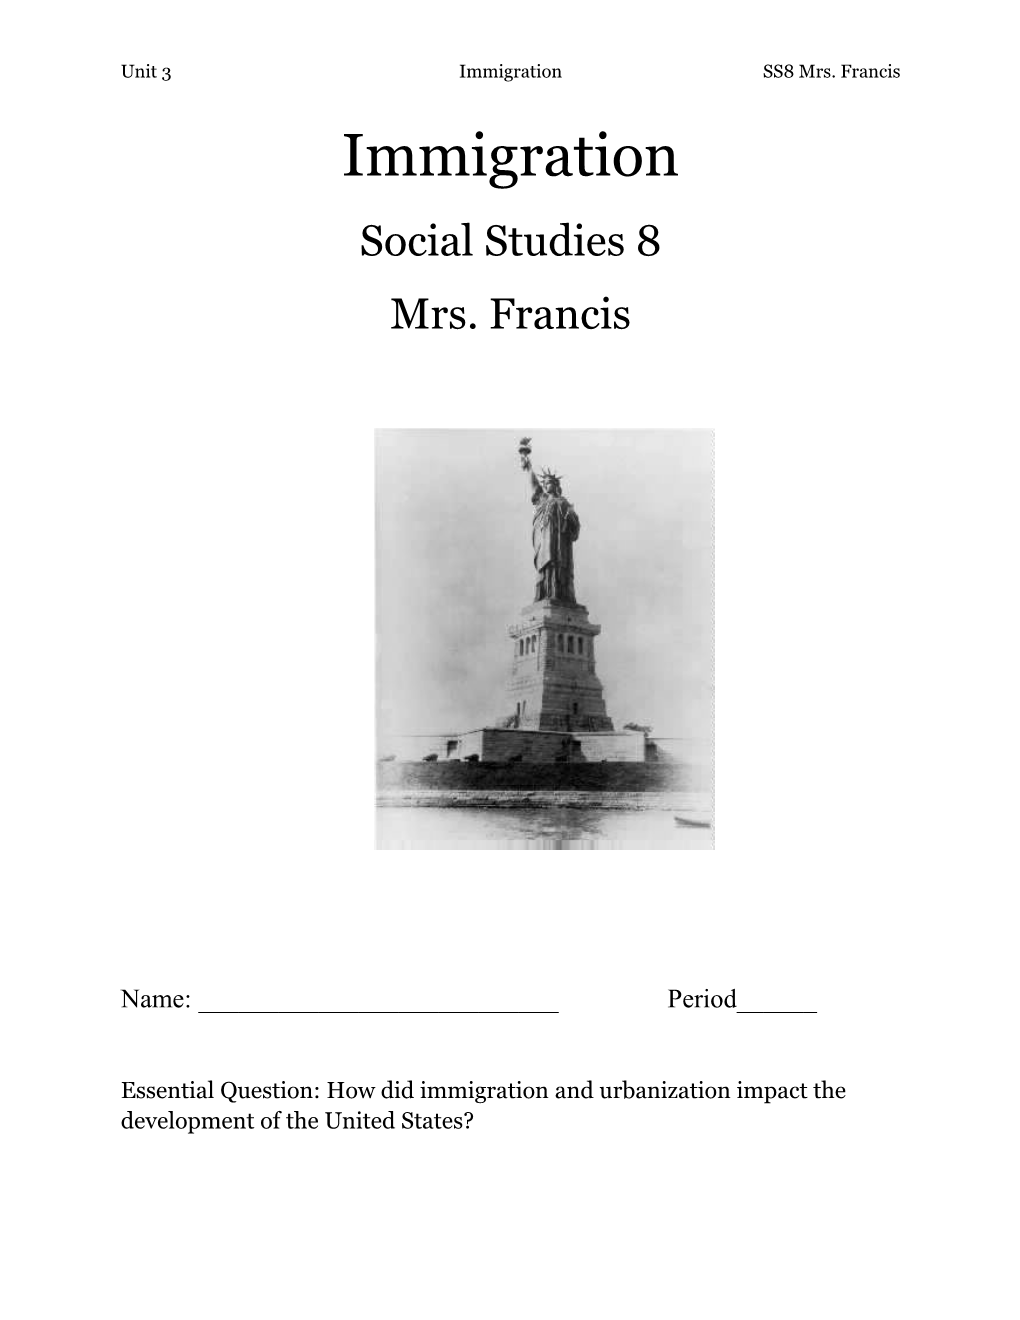 Aim: Why Did Immigrants Come to the United States?